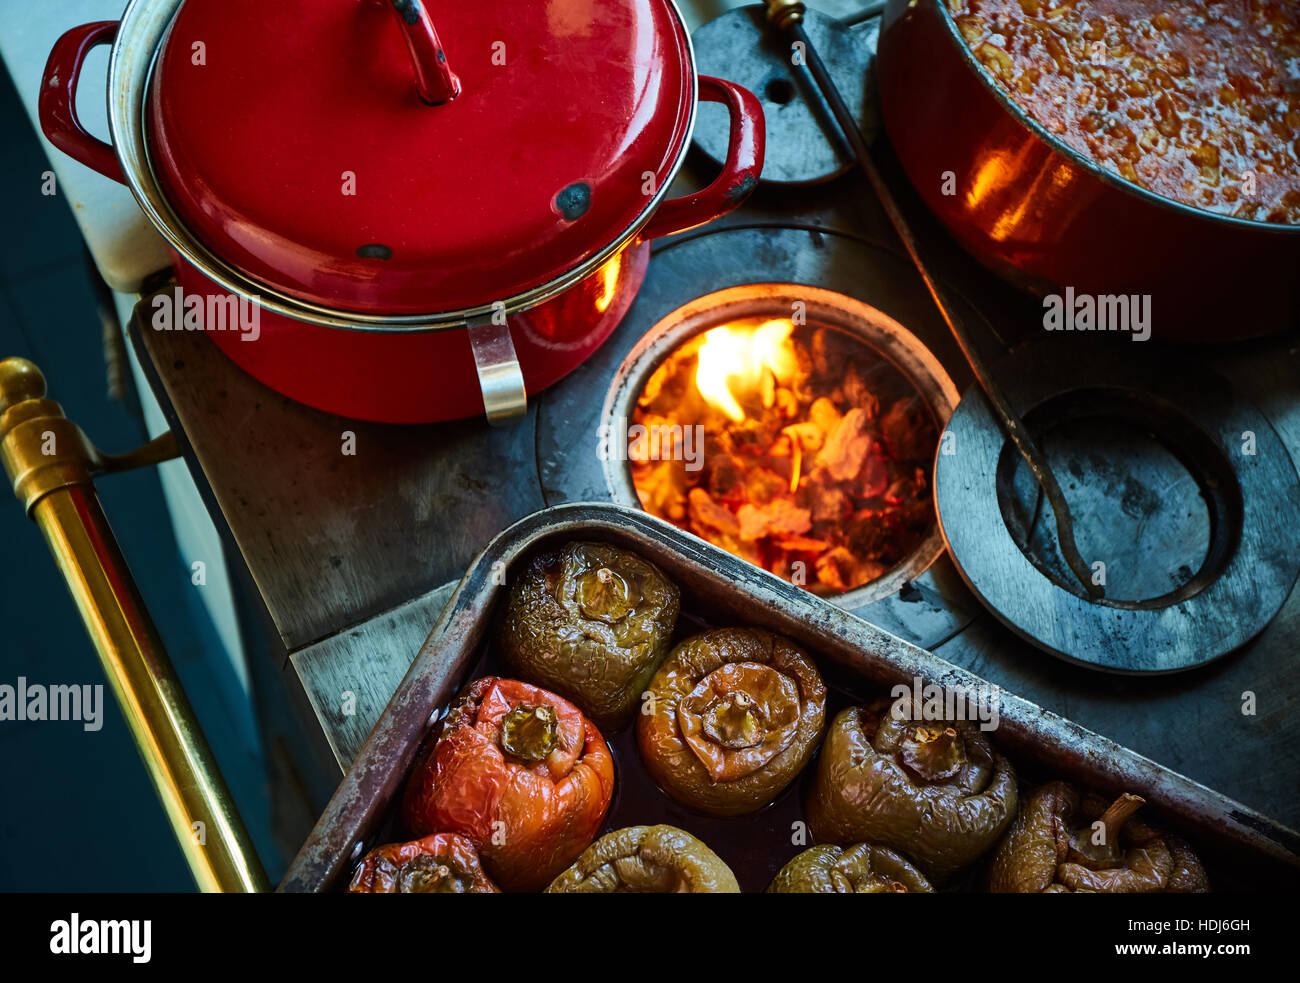 stuffed peppers over an old coal kitchen fired and other stews Stock Photo